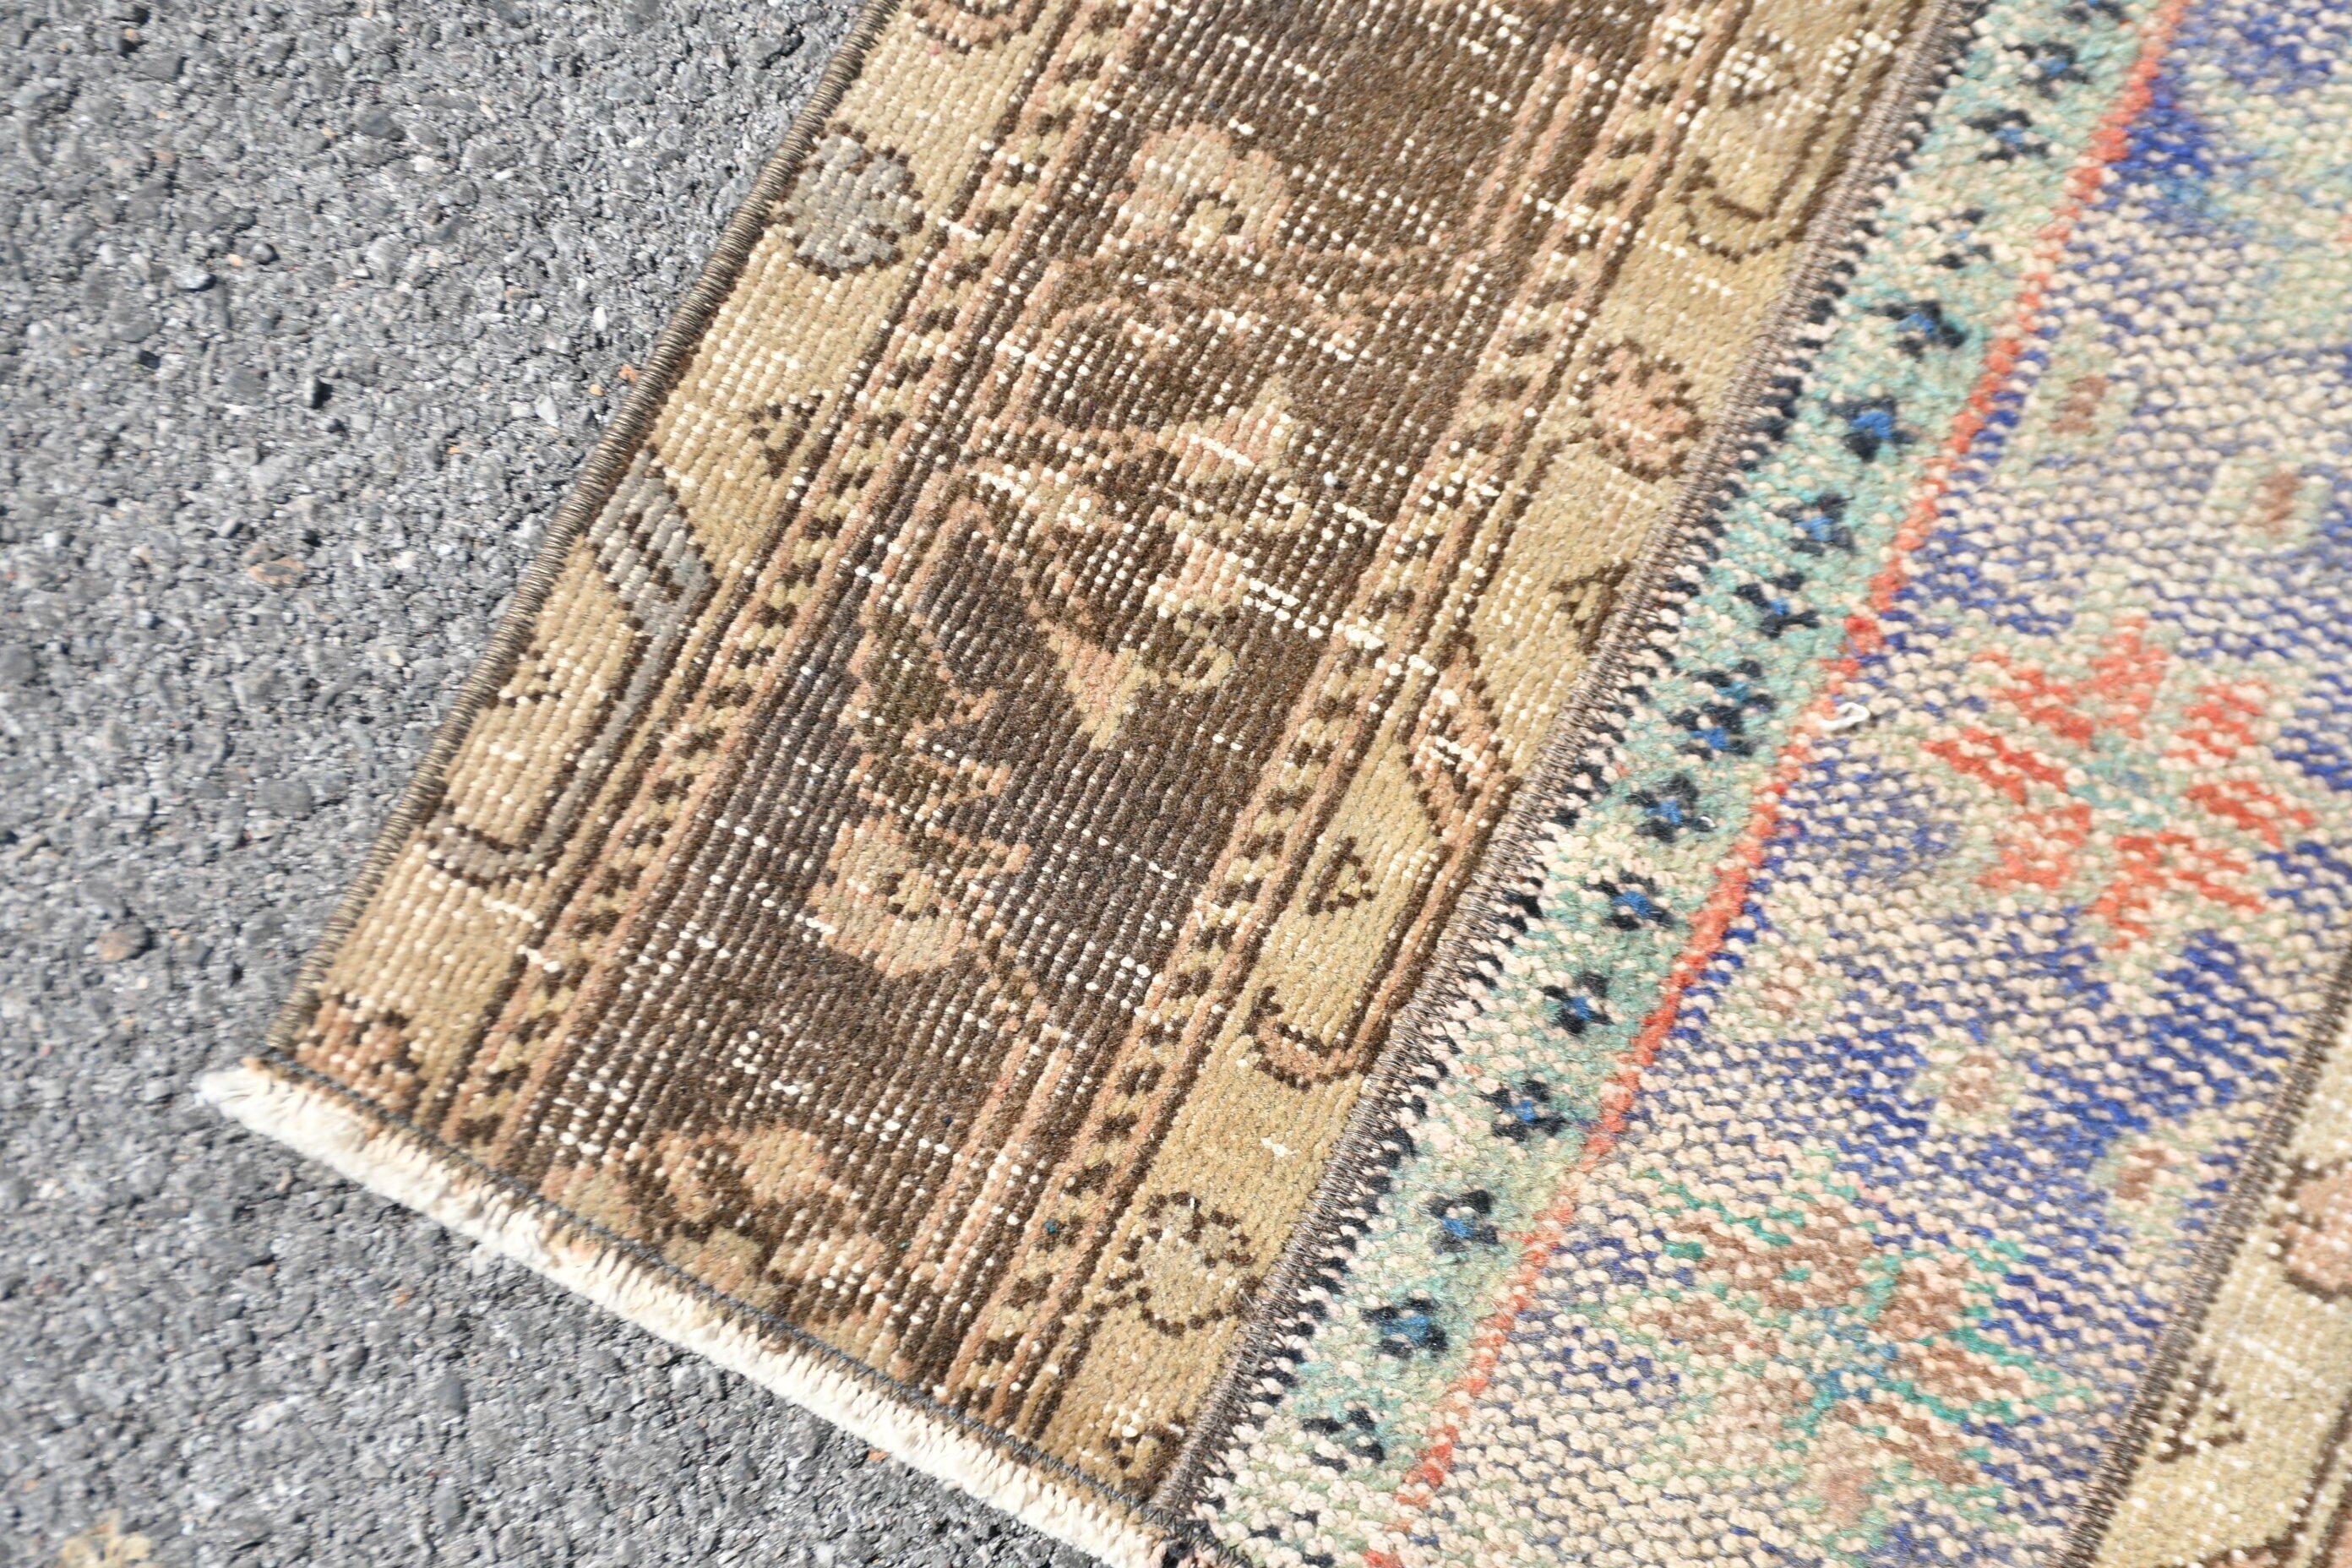 Vintage Rug, Rugs for Wall Hanging, 2.2x4.2 ft Small Rug, Bedroom Rug, Turkish Rugs, Kitchen Rugs, Brown Antique Rug